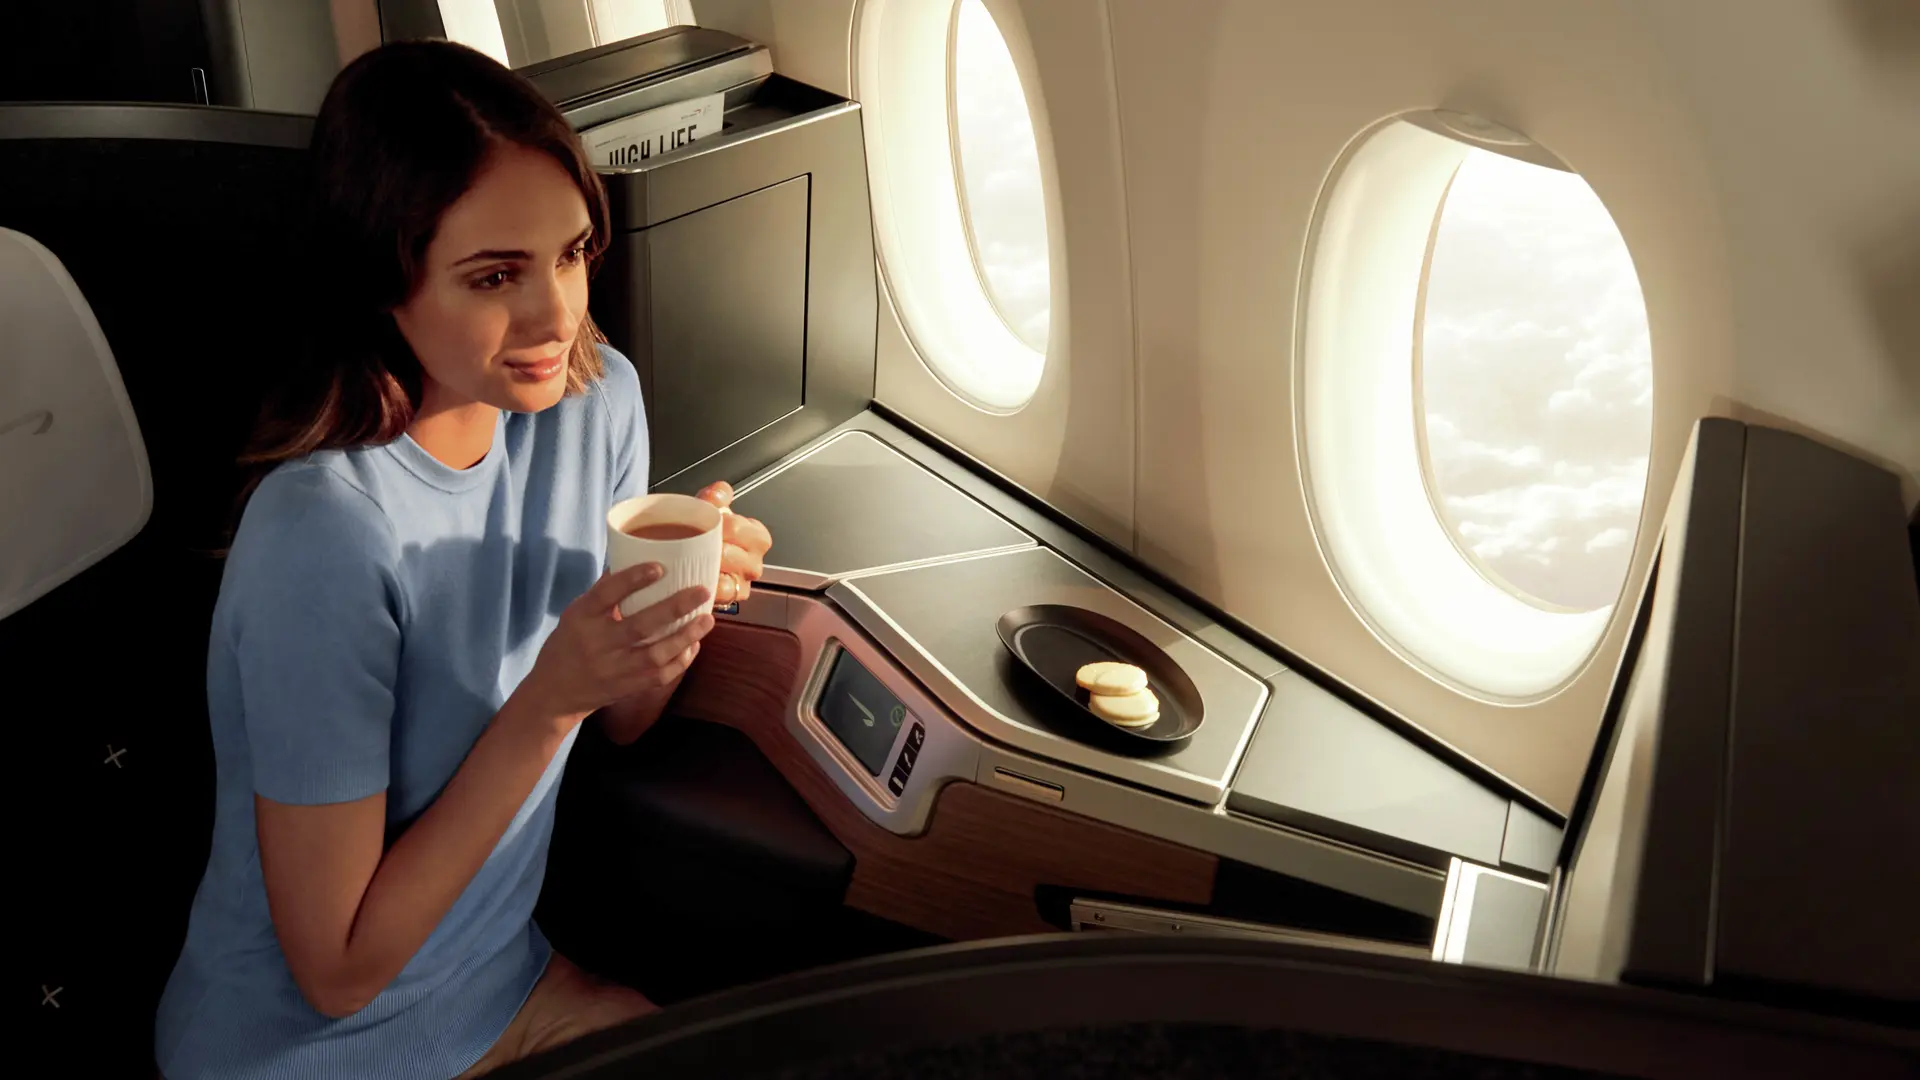 Airlines Articles - British Airways "Luxury For Less" Business Class Sale